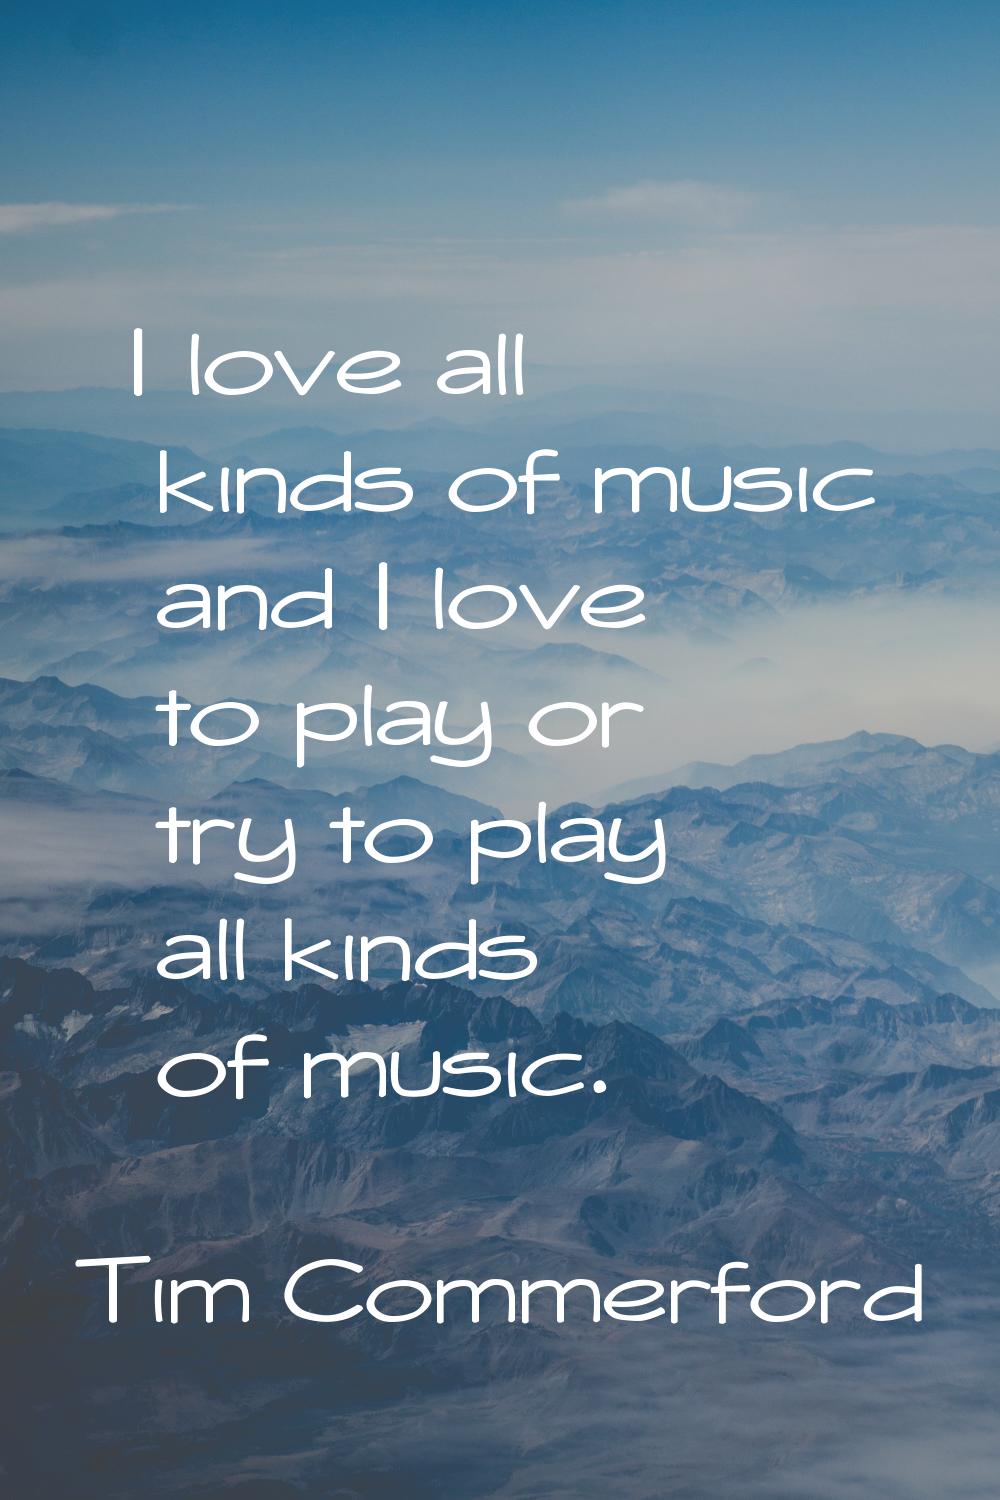 I love all kinds of music and I love to play or try to play all kinds of music.